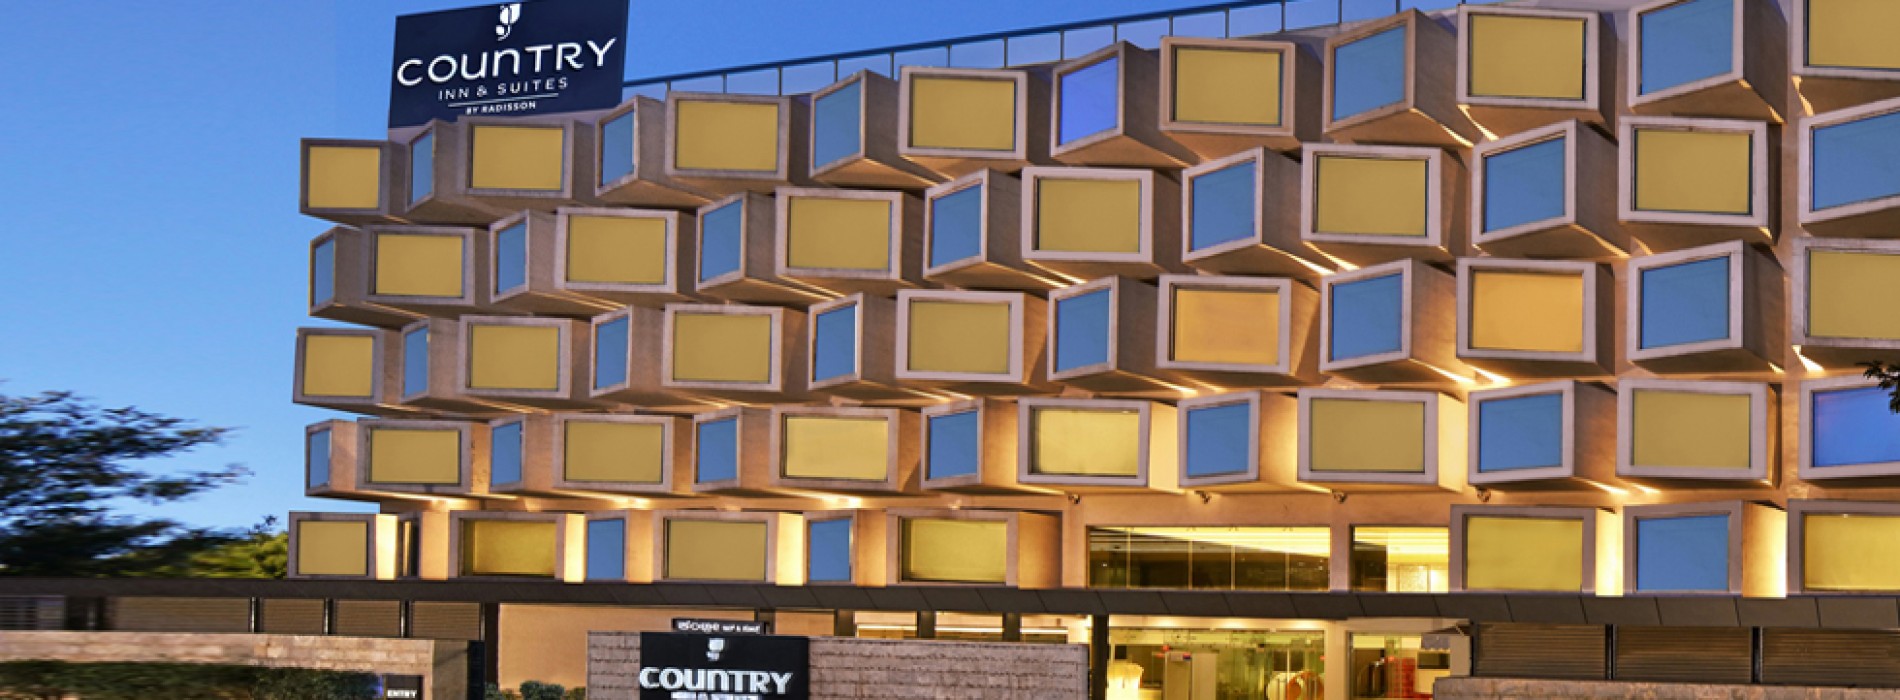 Country Inns & Suites By Carlson® announces name change to Country Inn & Suites® by Radisson